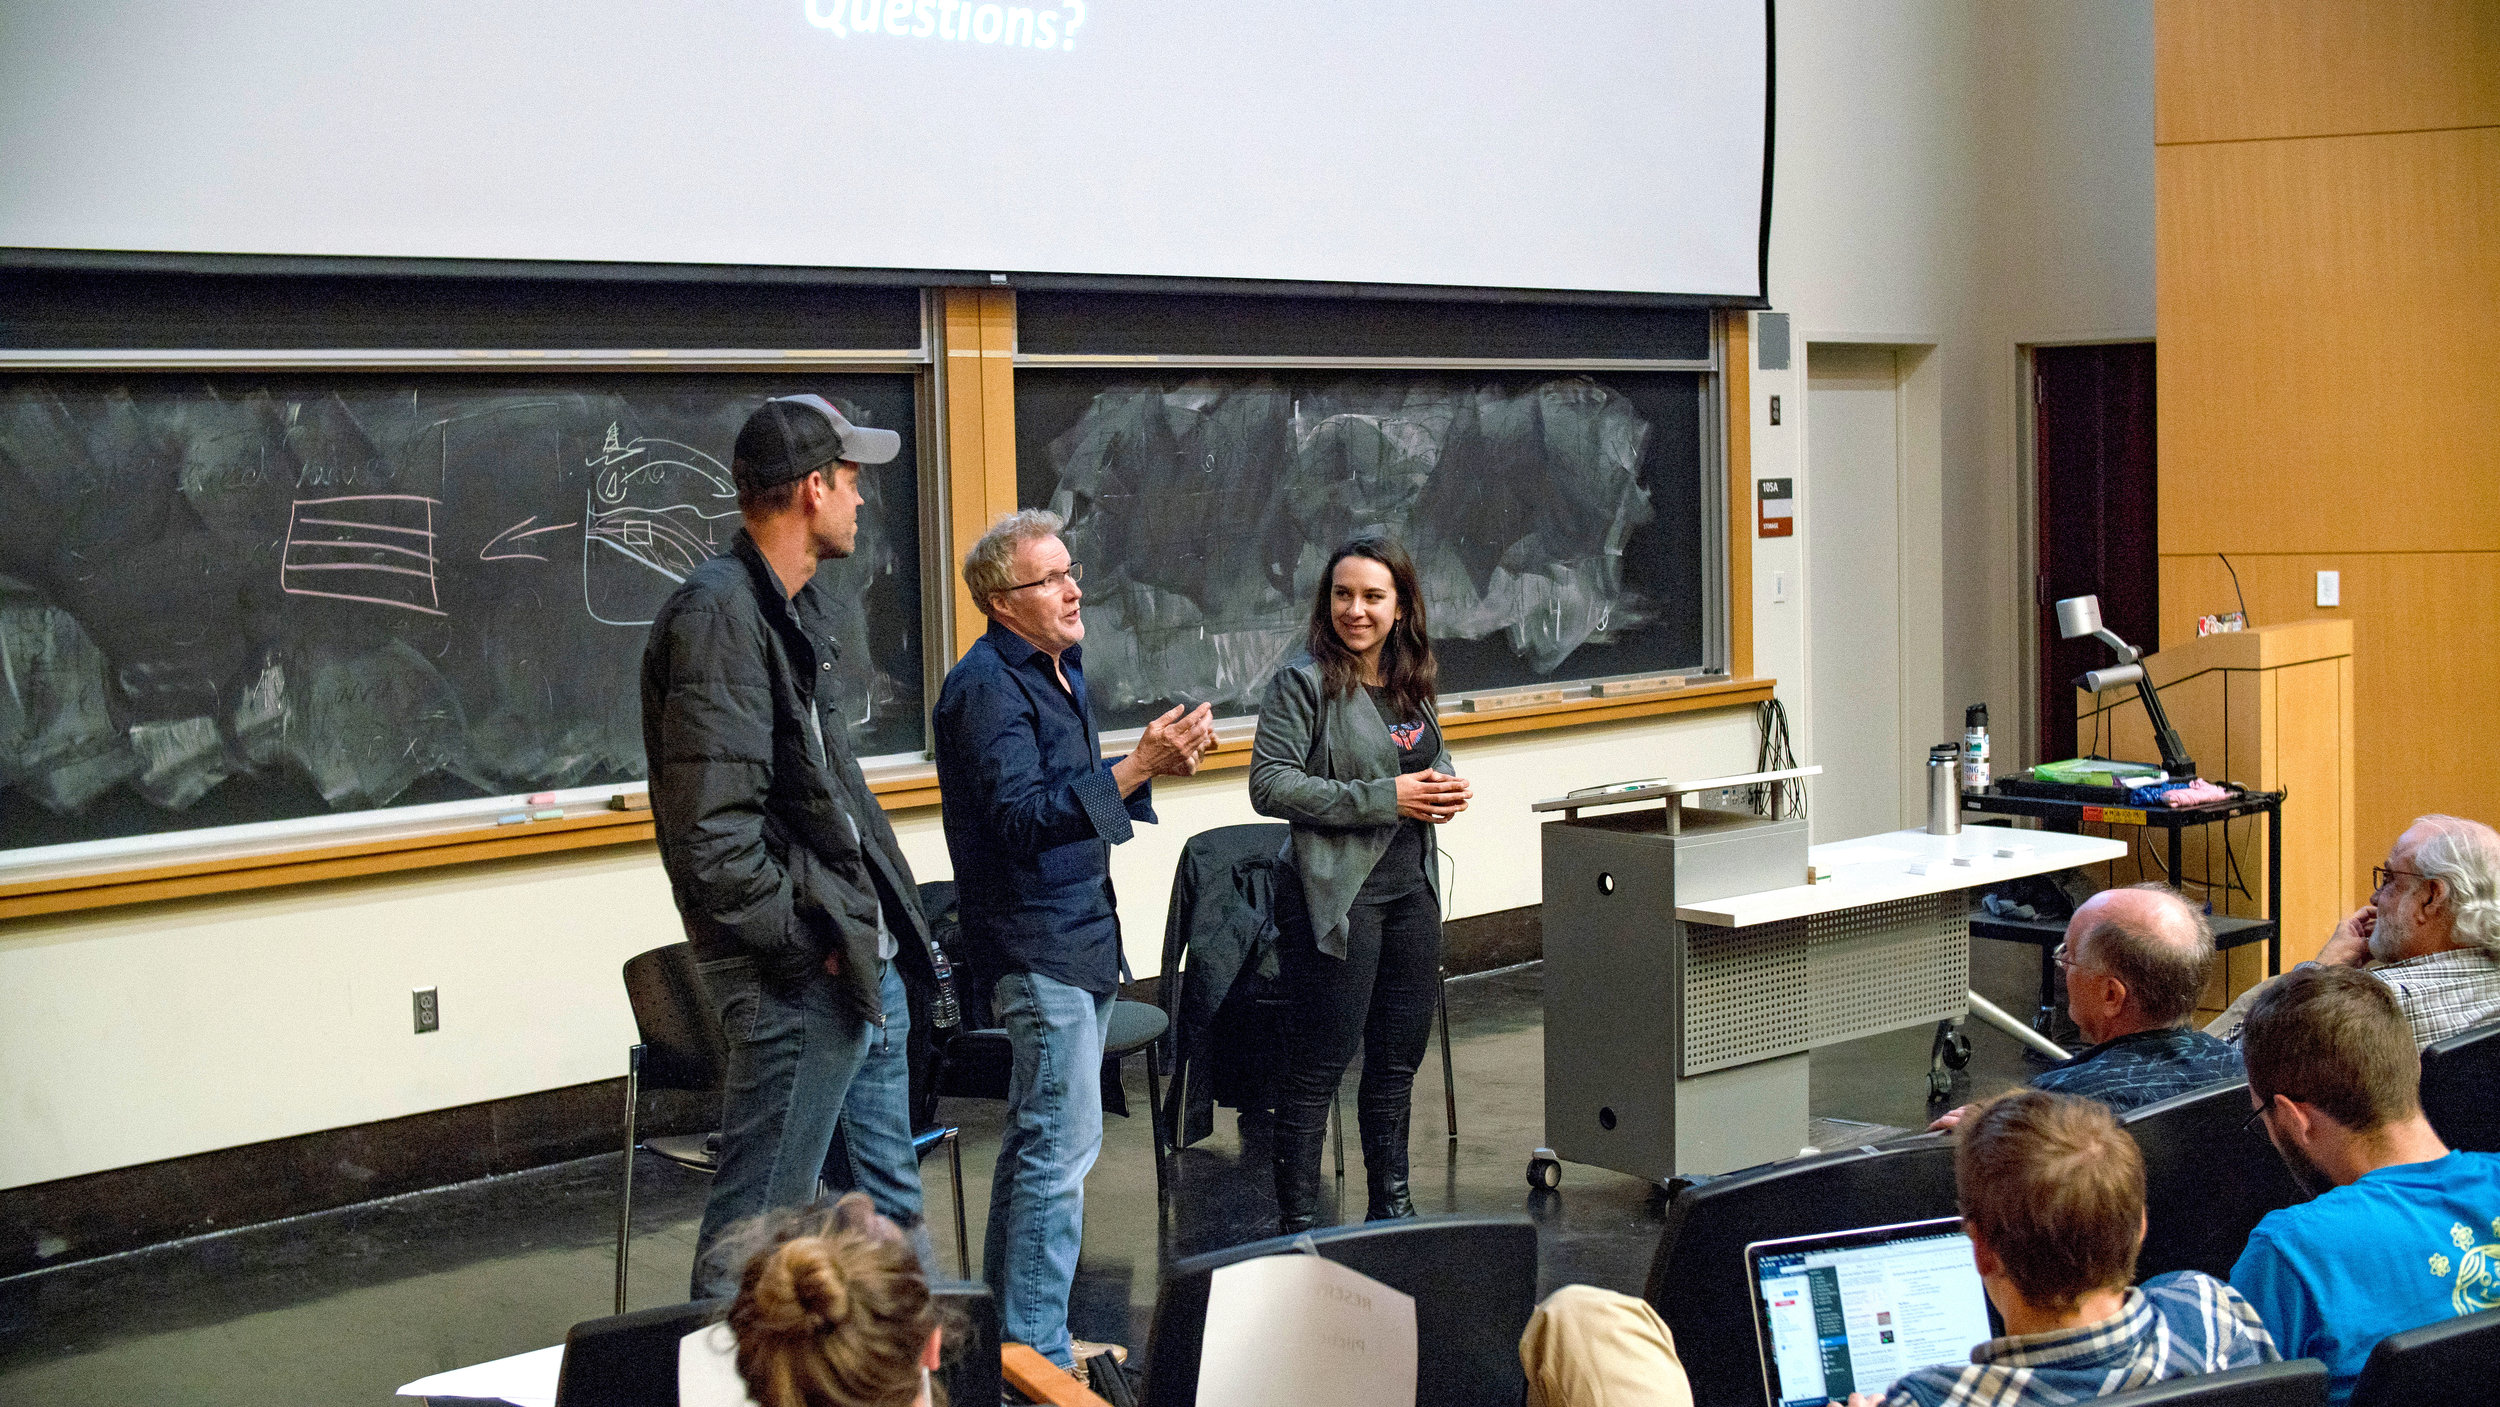  Joined by Character Art Director Matt Nolte (left) and Production Designer Steve Pilcher (center) from Pixar Animation Studios, I presented a workshop on visual storytelling for science communication at UC Berkeley in March 2018 for an audience of o